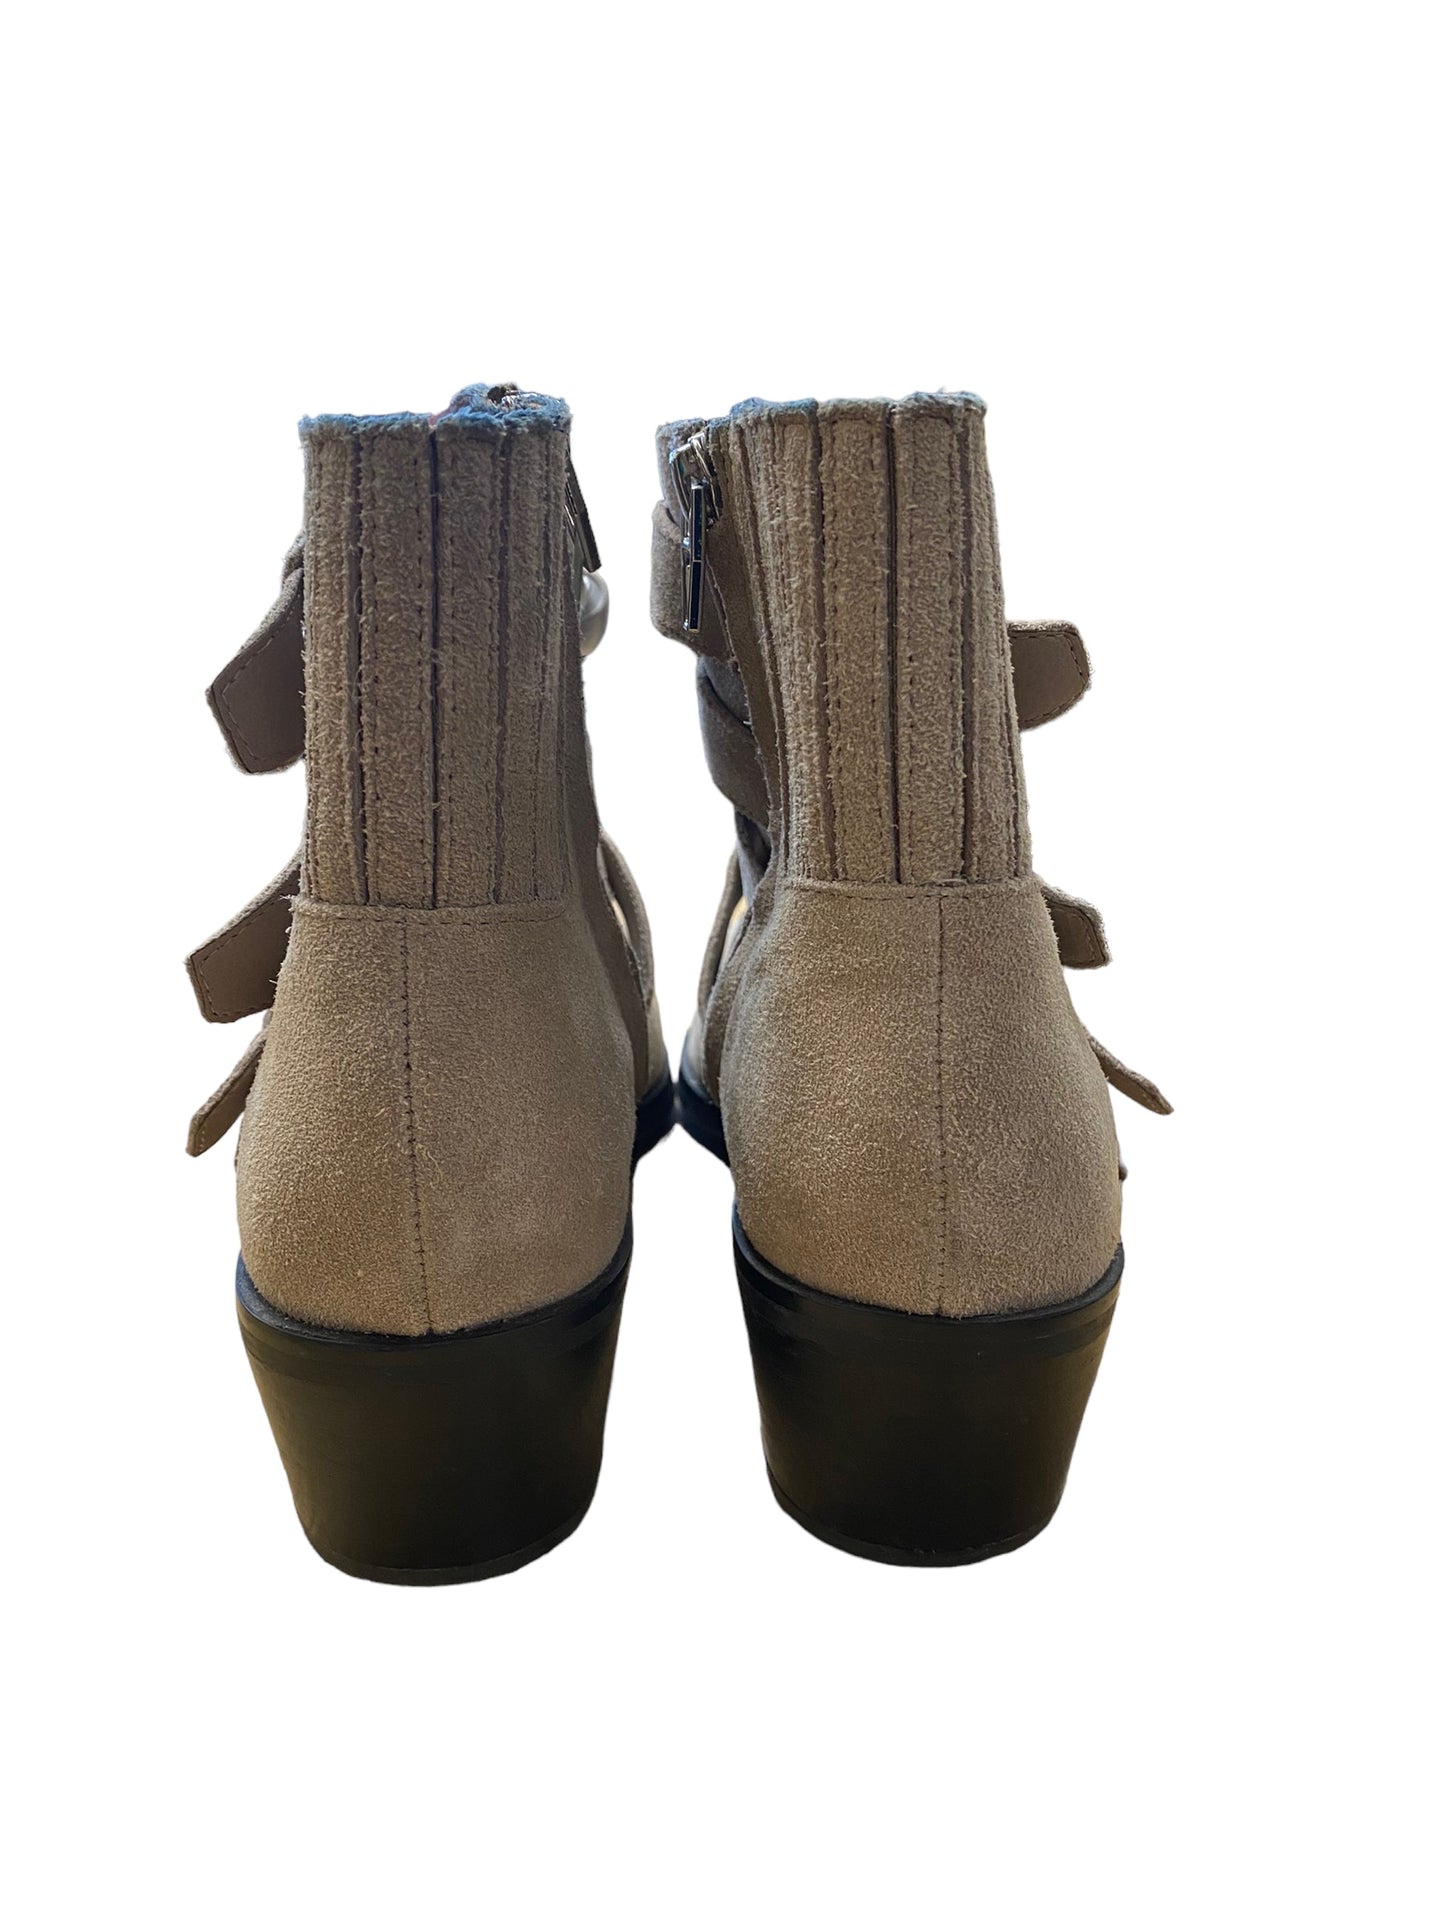 Boots Ankle Flats By Dolce Vita  Size: 8.5